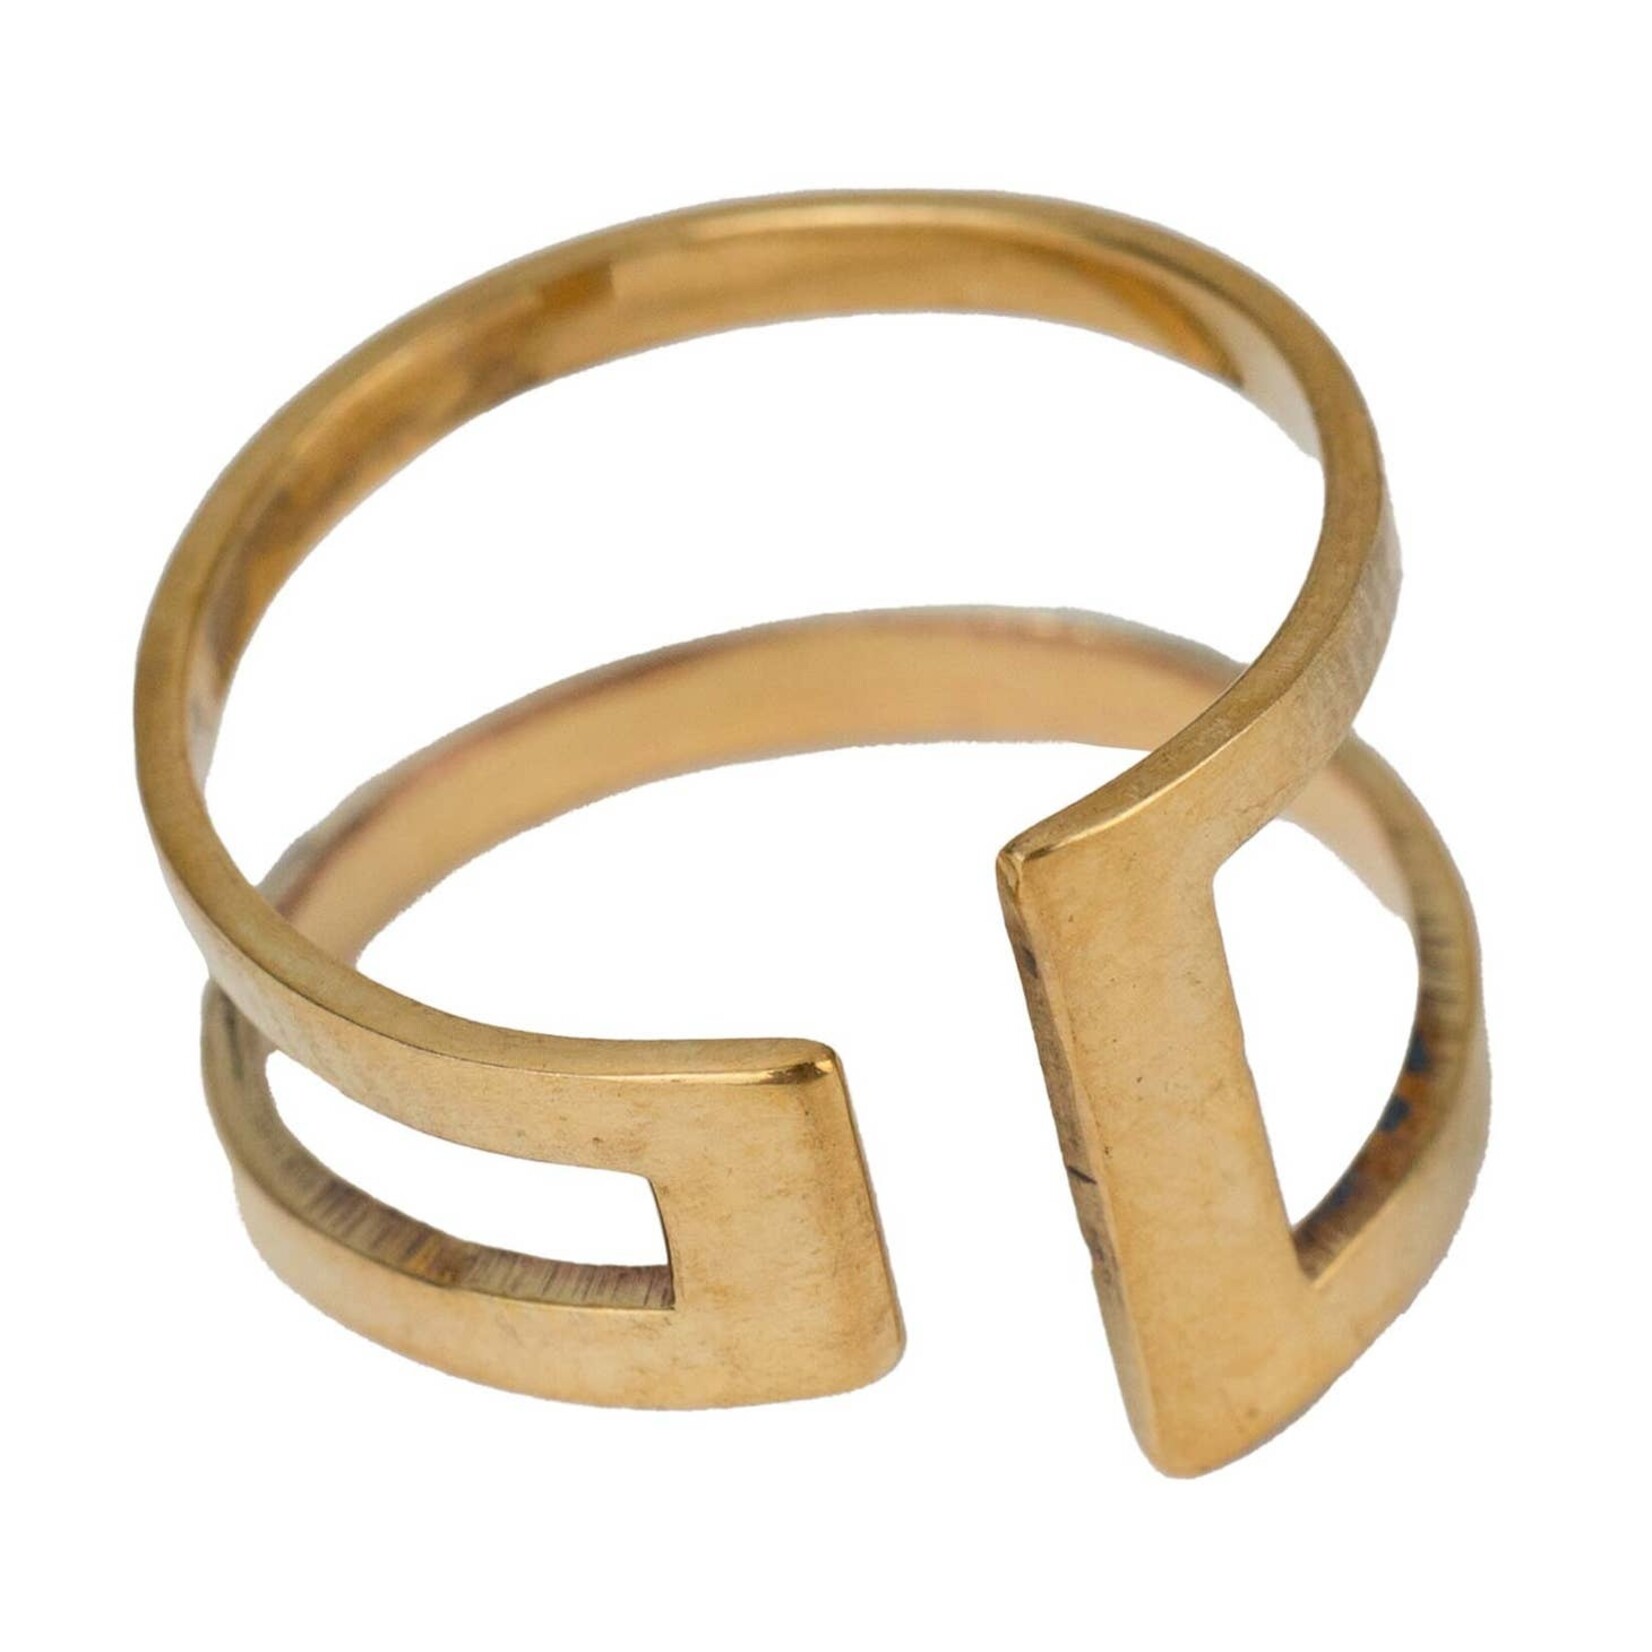 Ten Thousand Villages USA Duality Cuff Ring, Cambodia